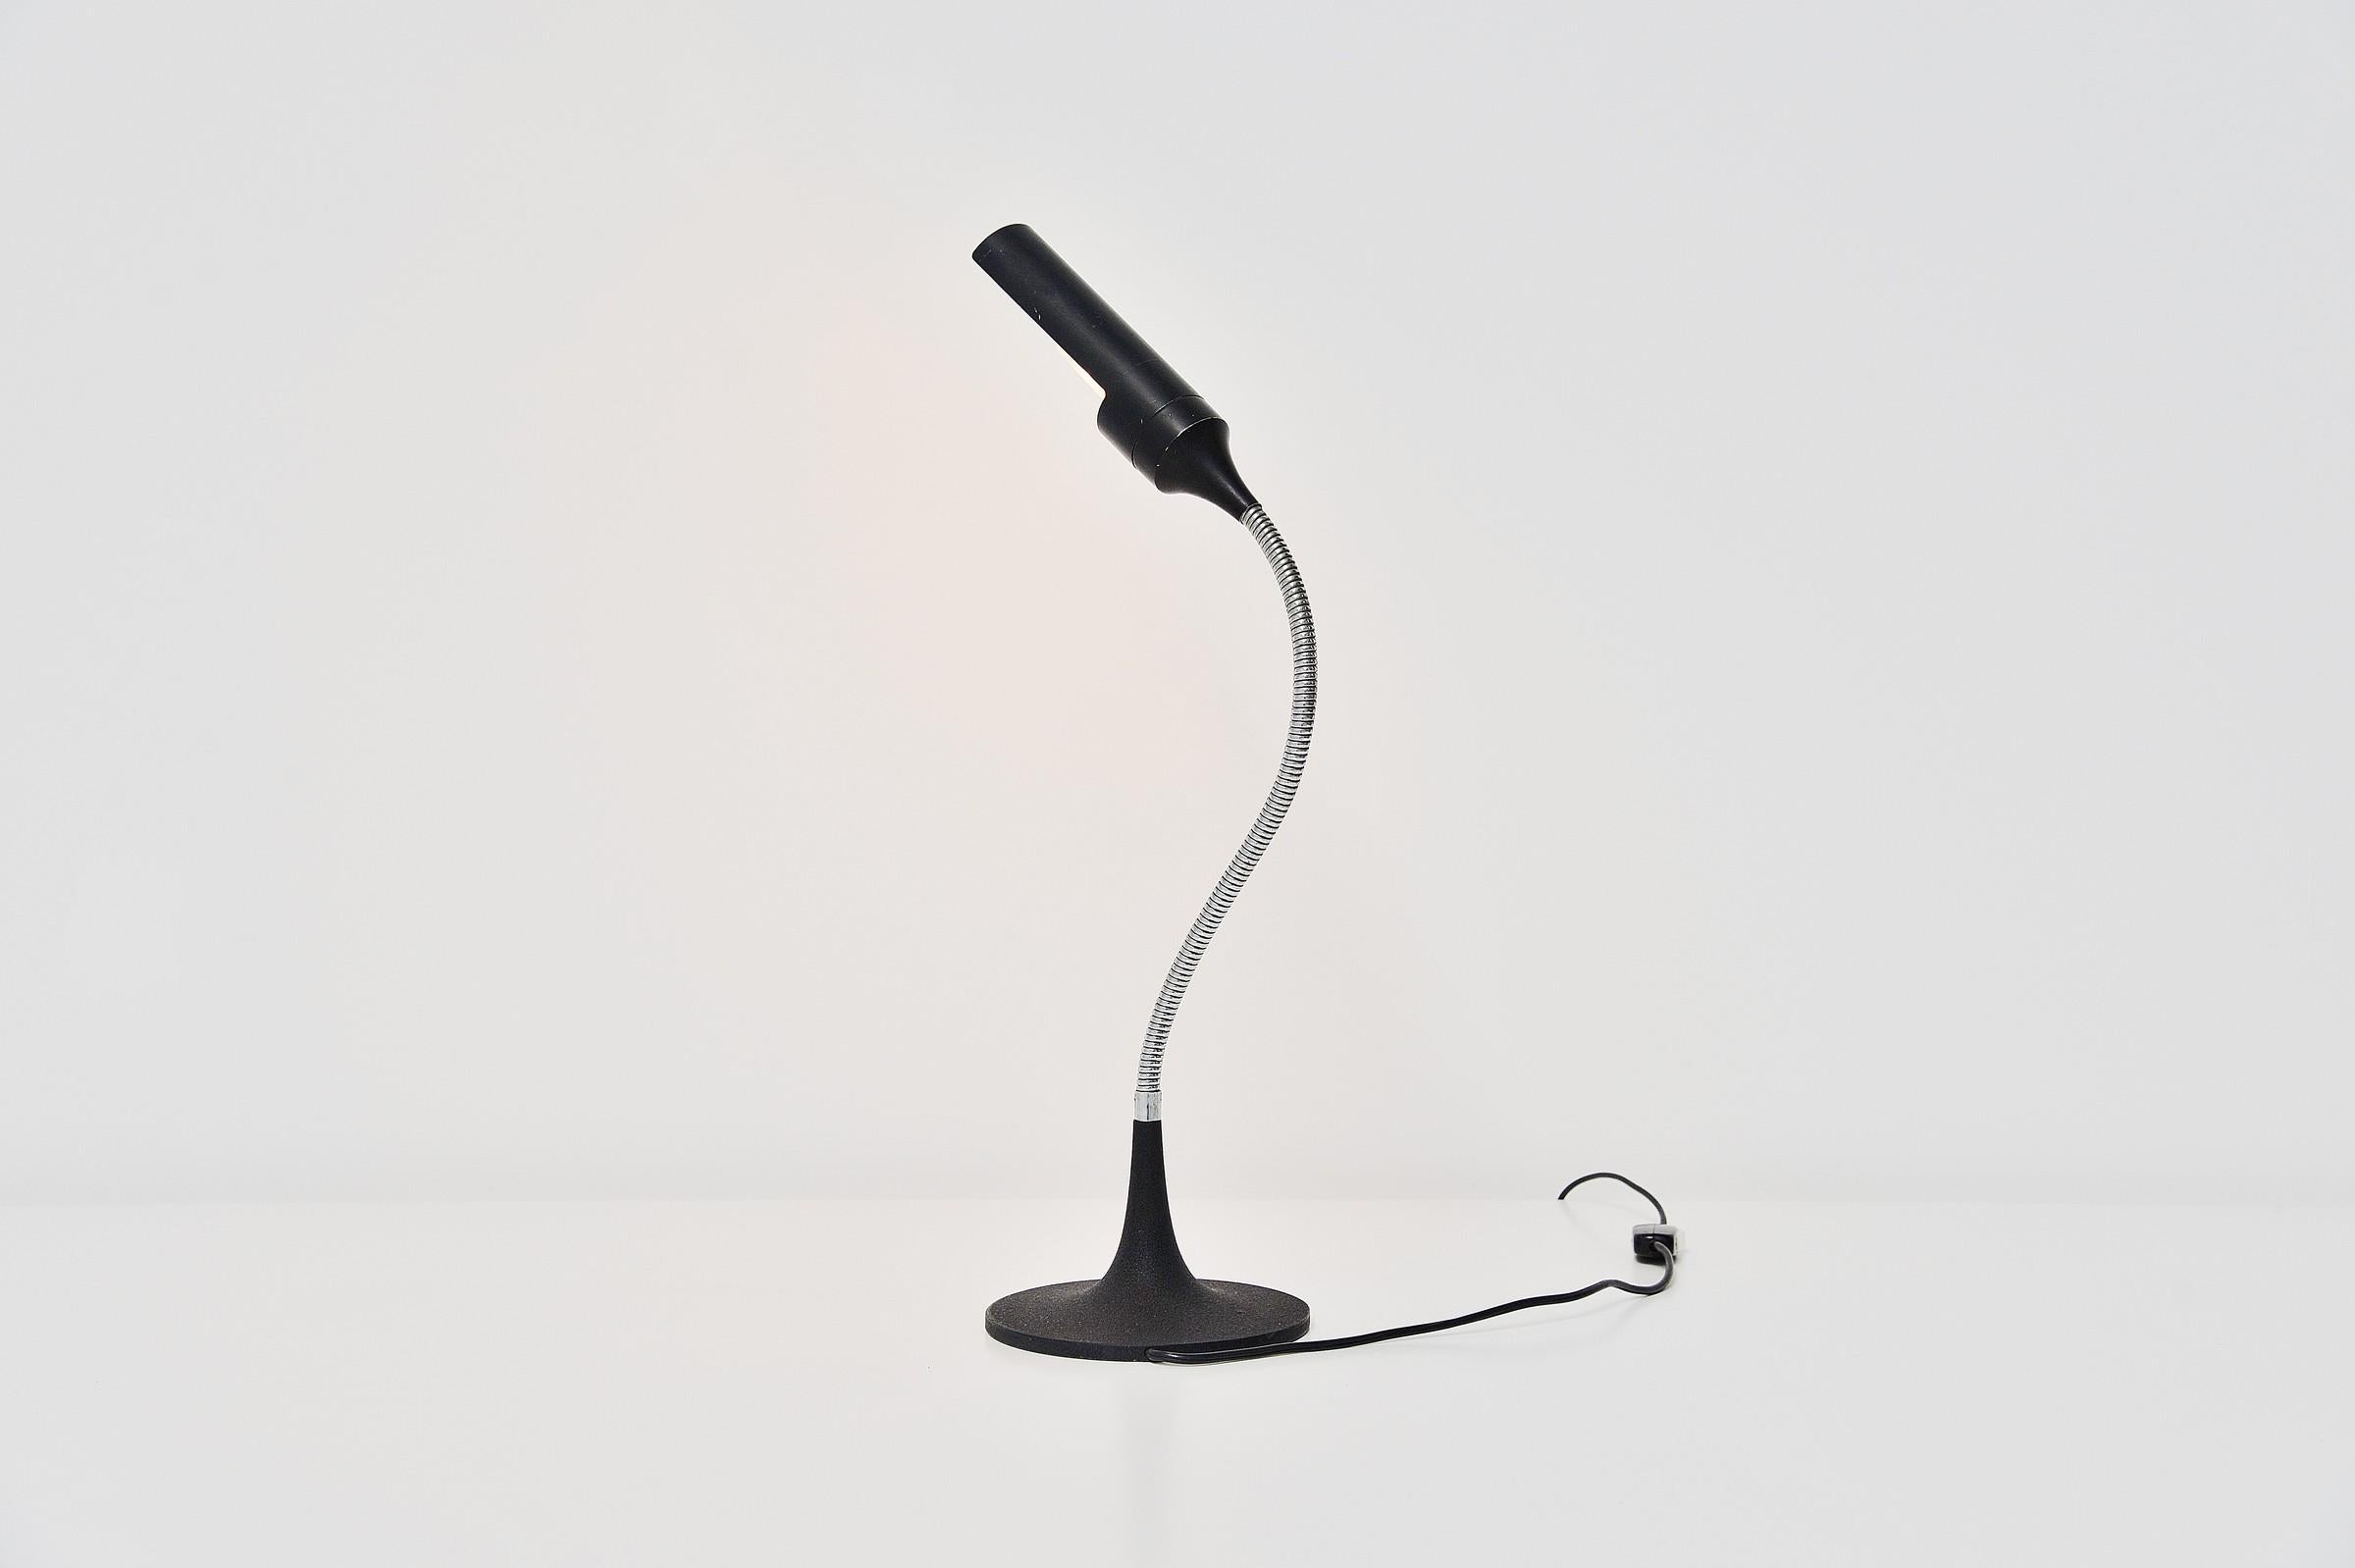 Plated Gino Sarfatti 595 Table Lamp Arteluce, Italy, 1961 For Sale